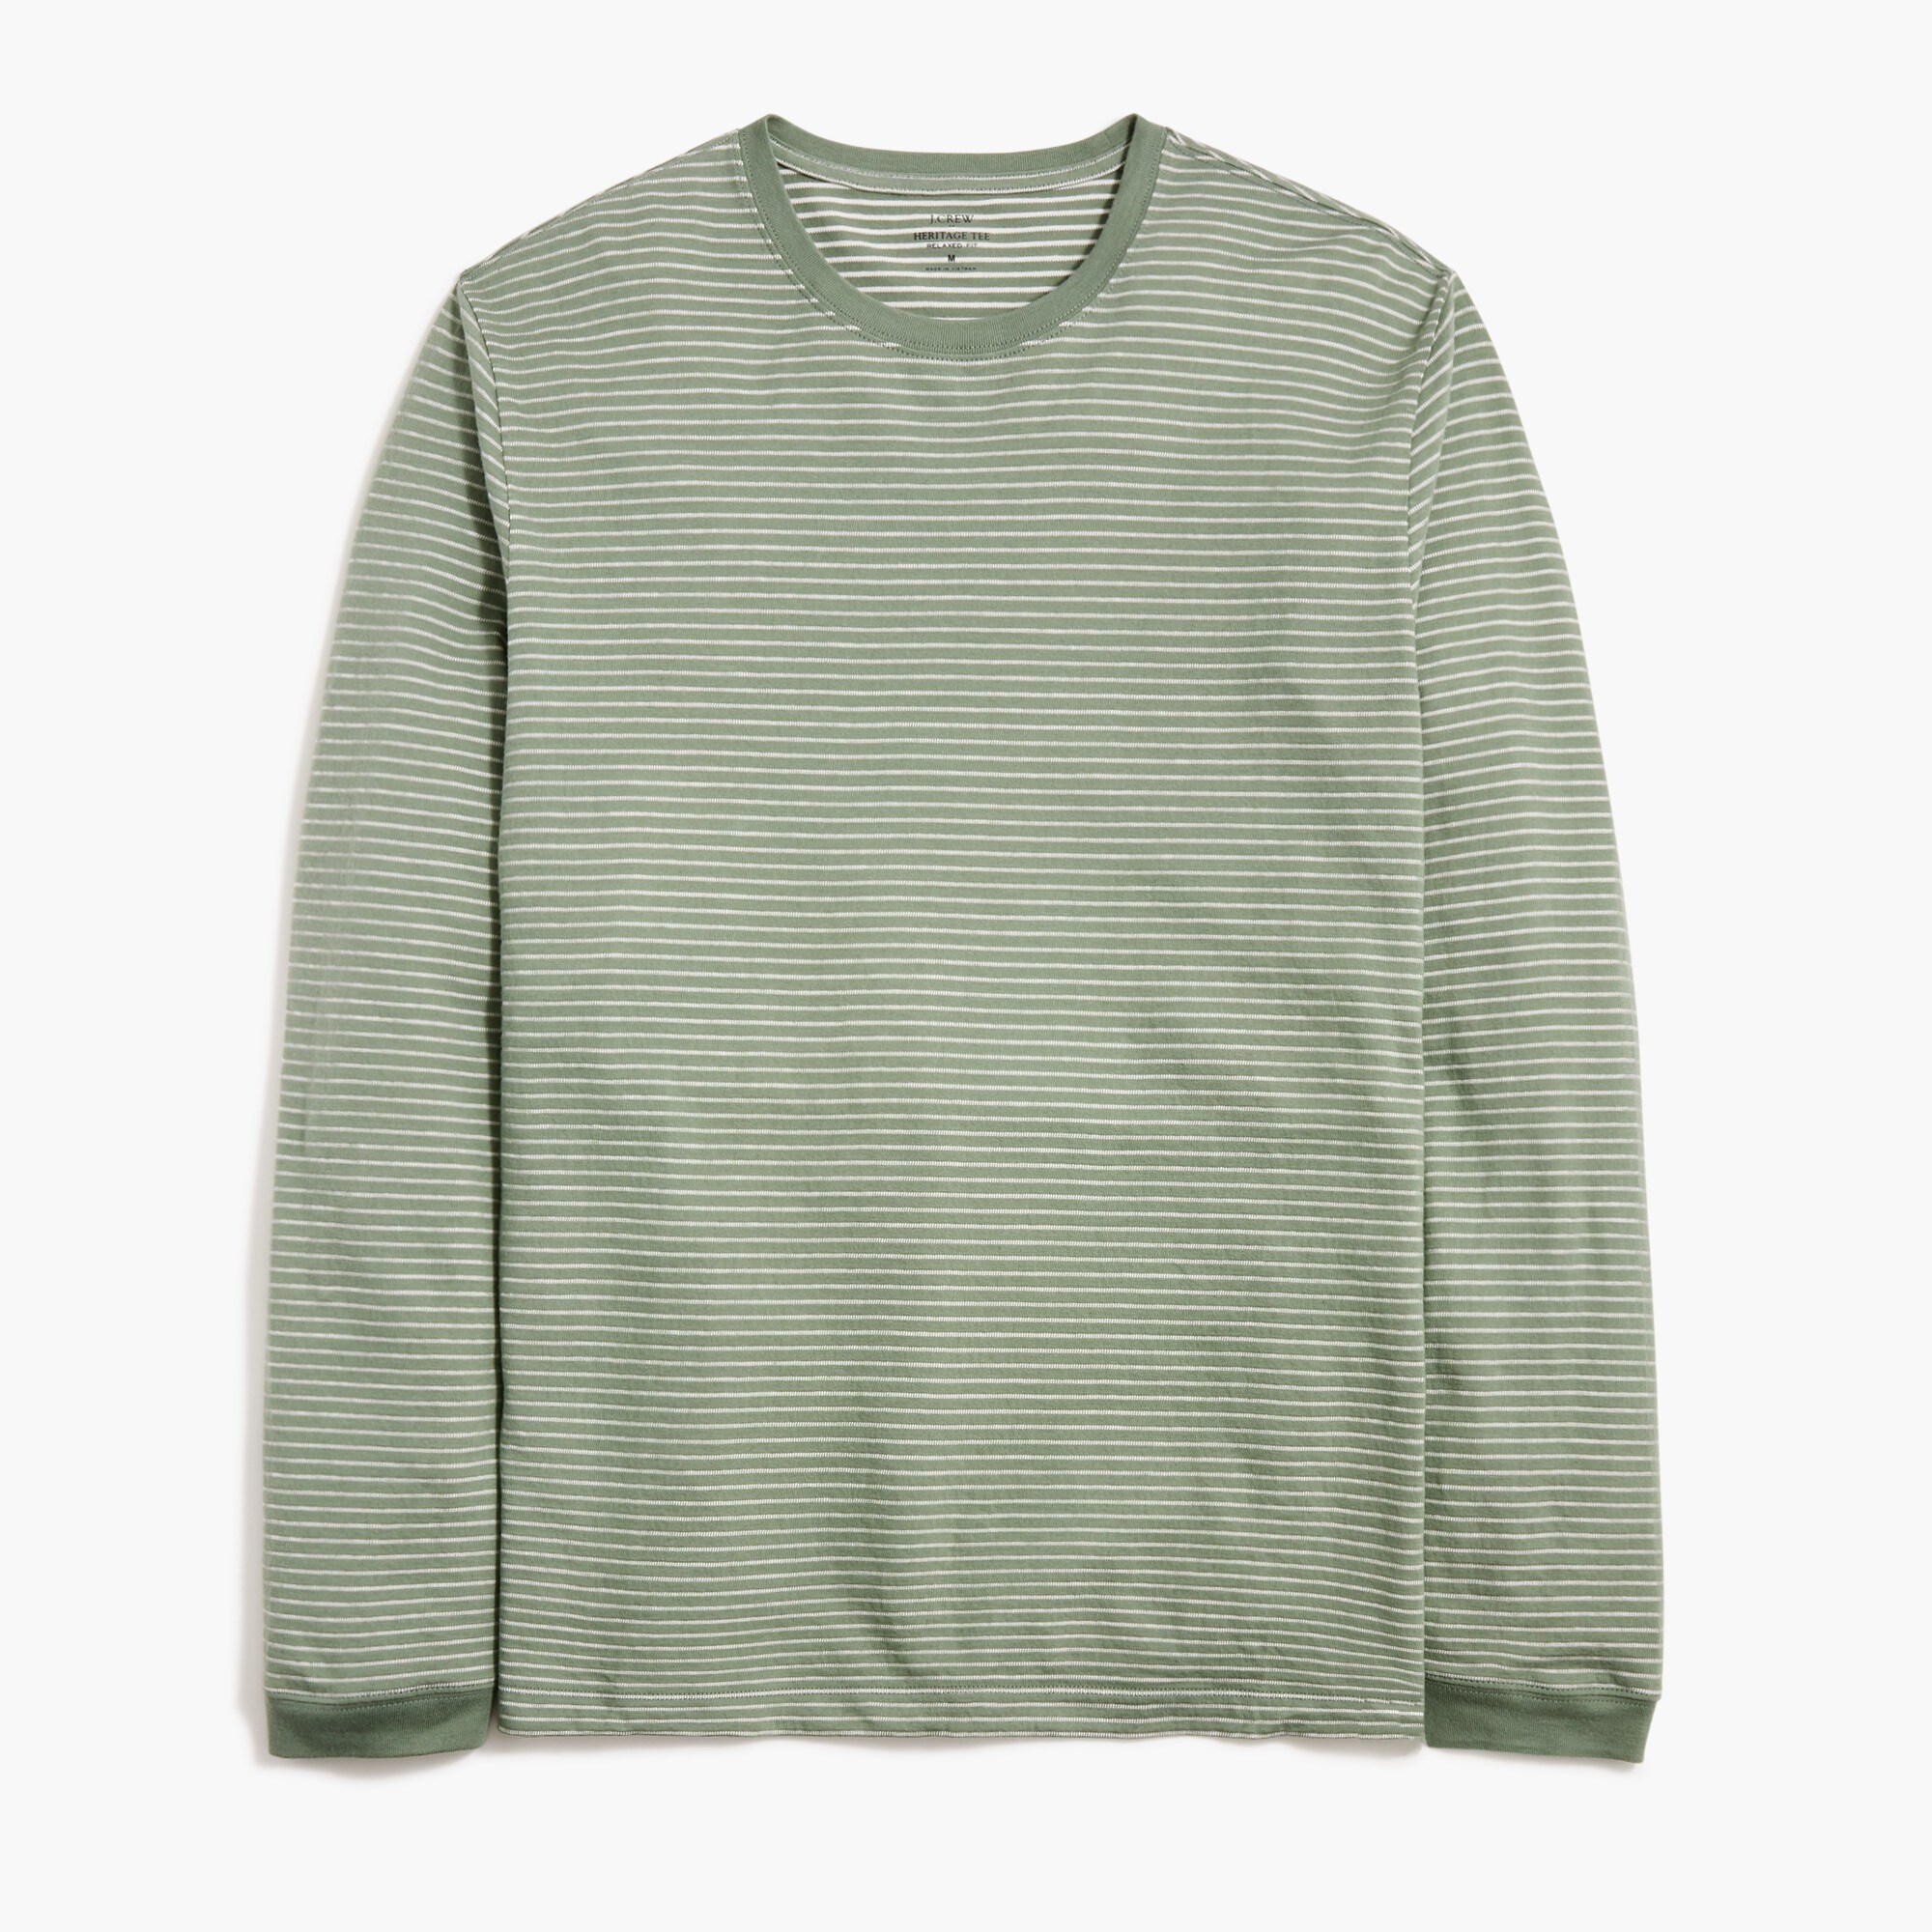  Long-sleeve textured stripe heritage tee in relaxed fit